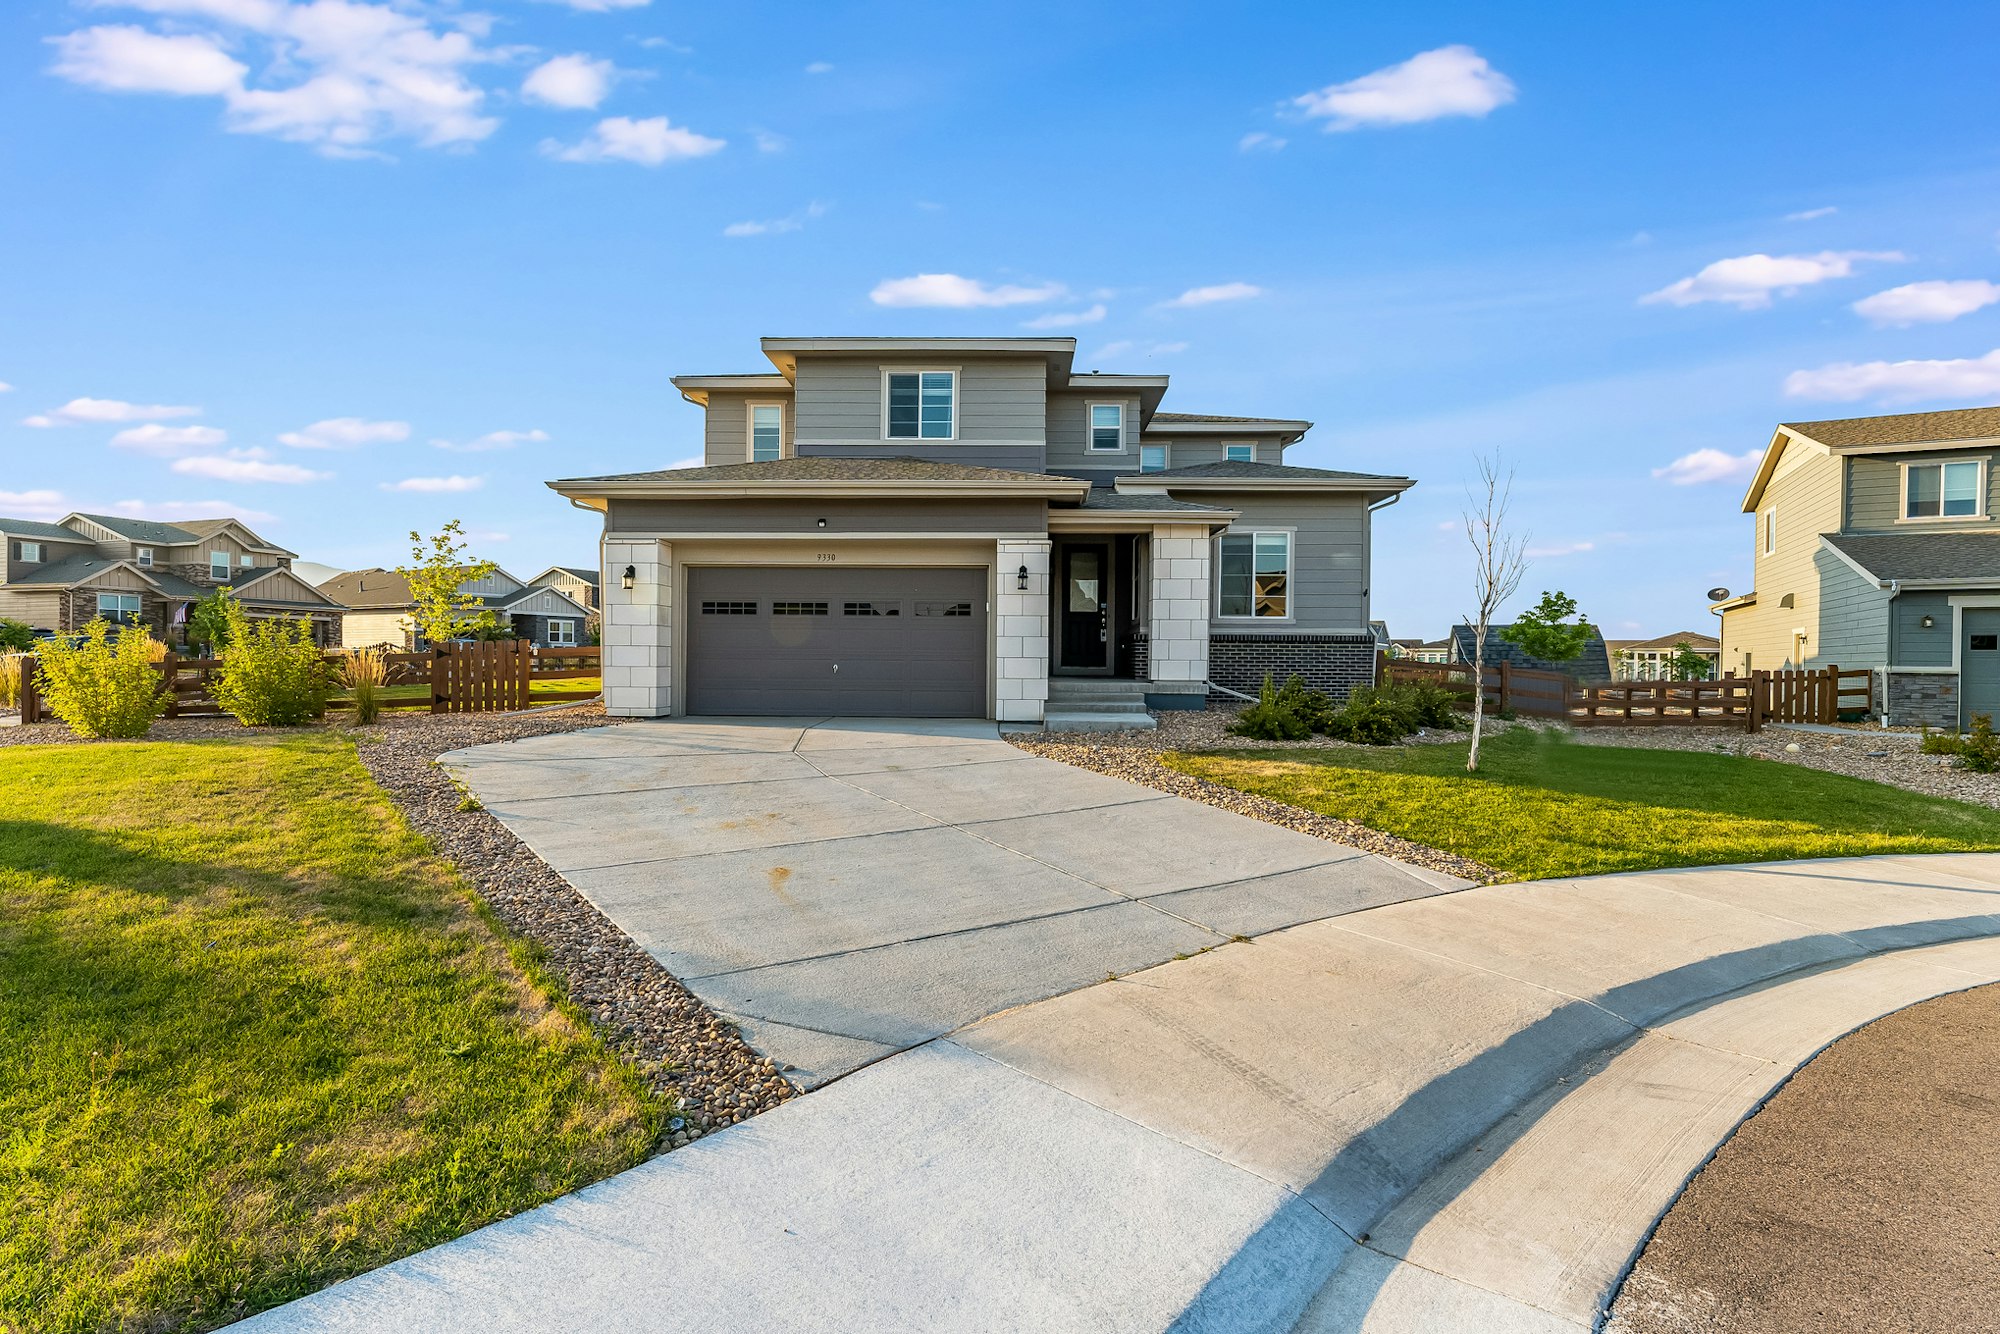 Photo 1 of 19 - 9330 Dunraven St, Arvada, CO 80007